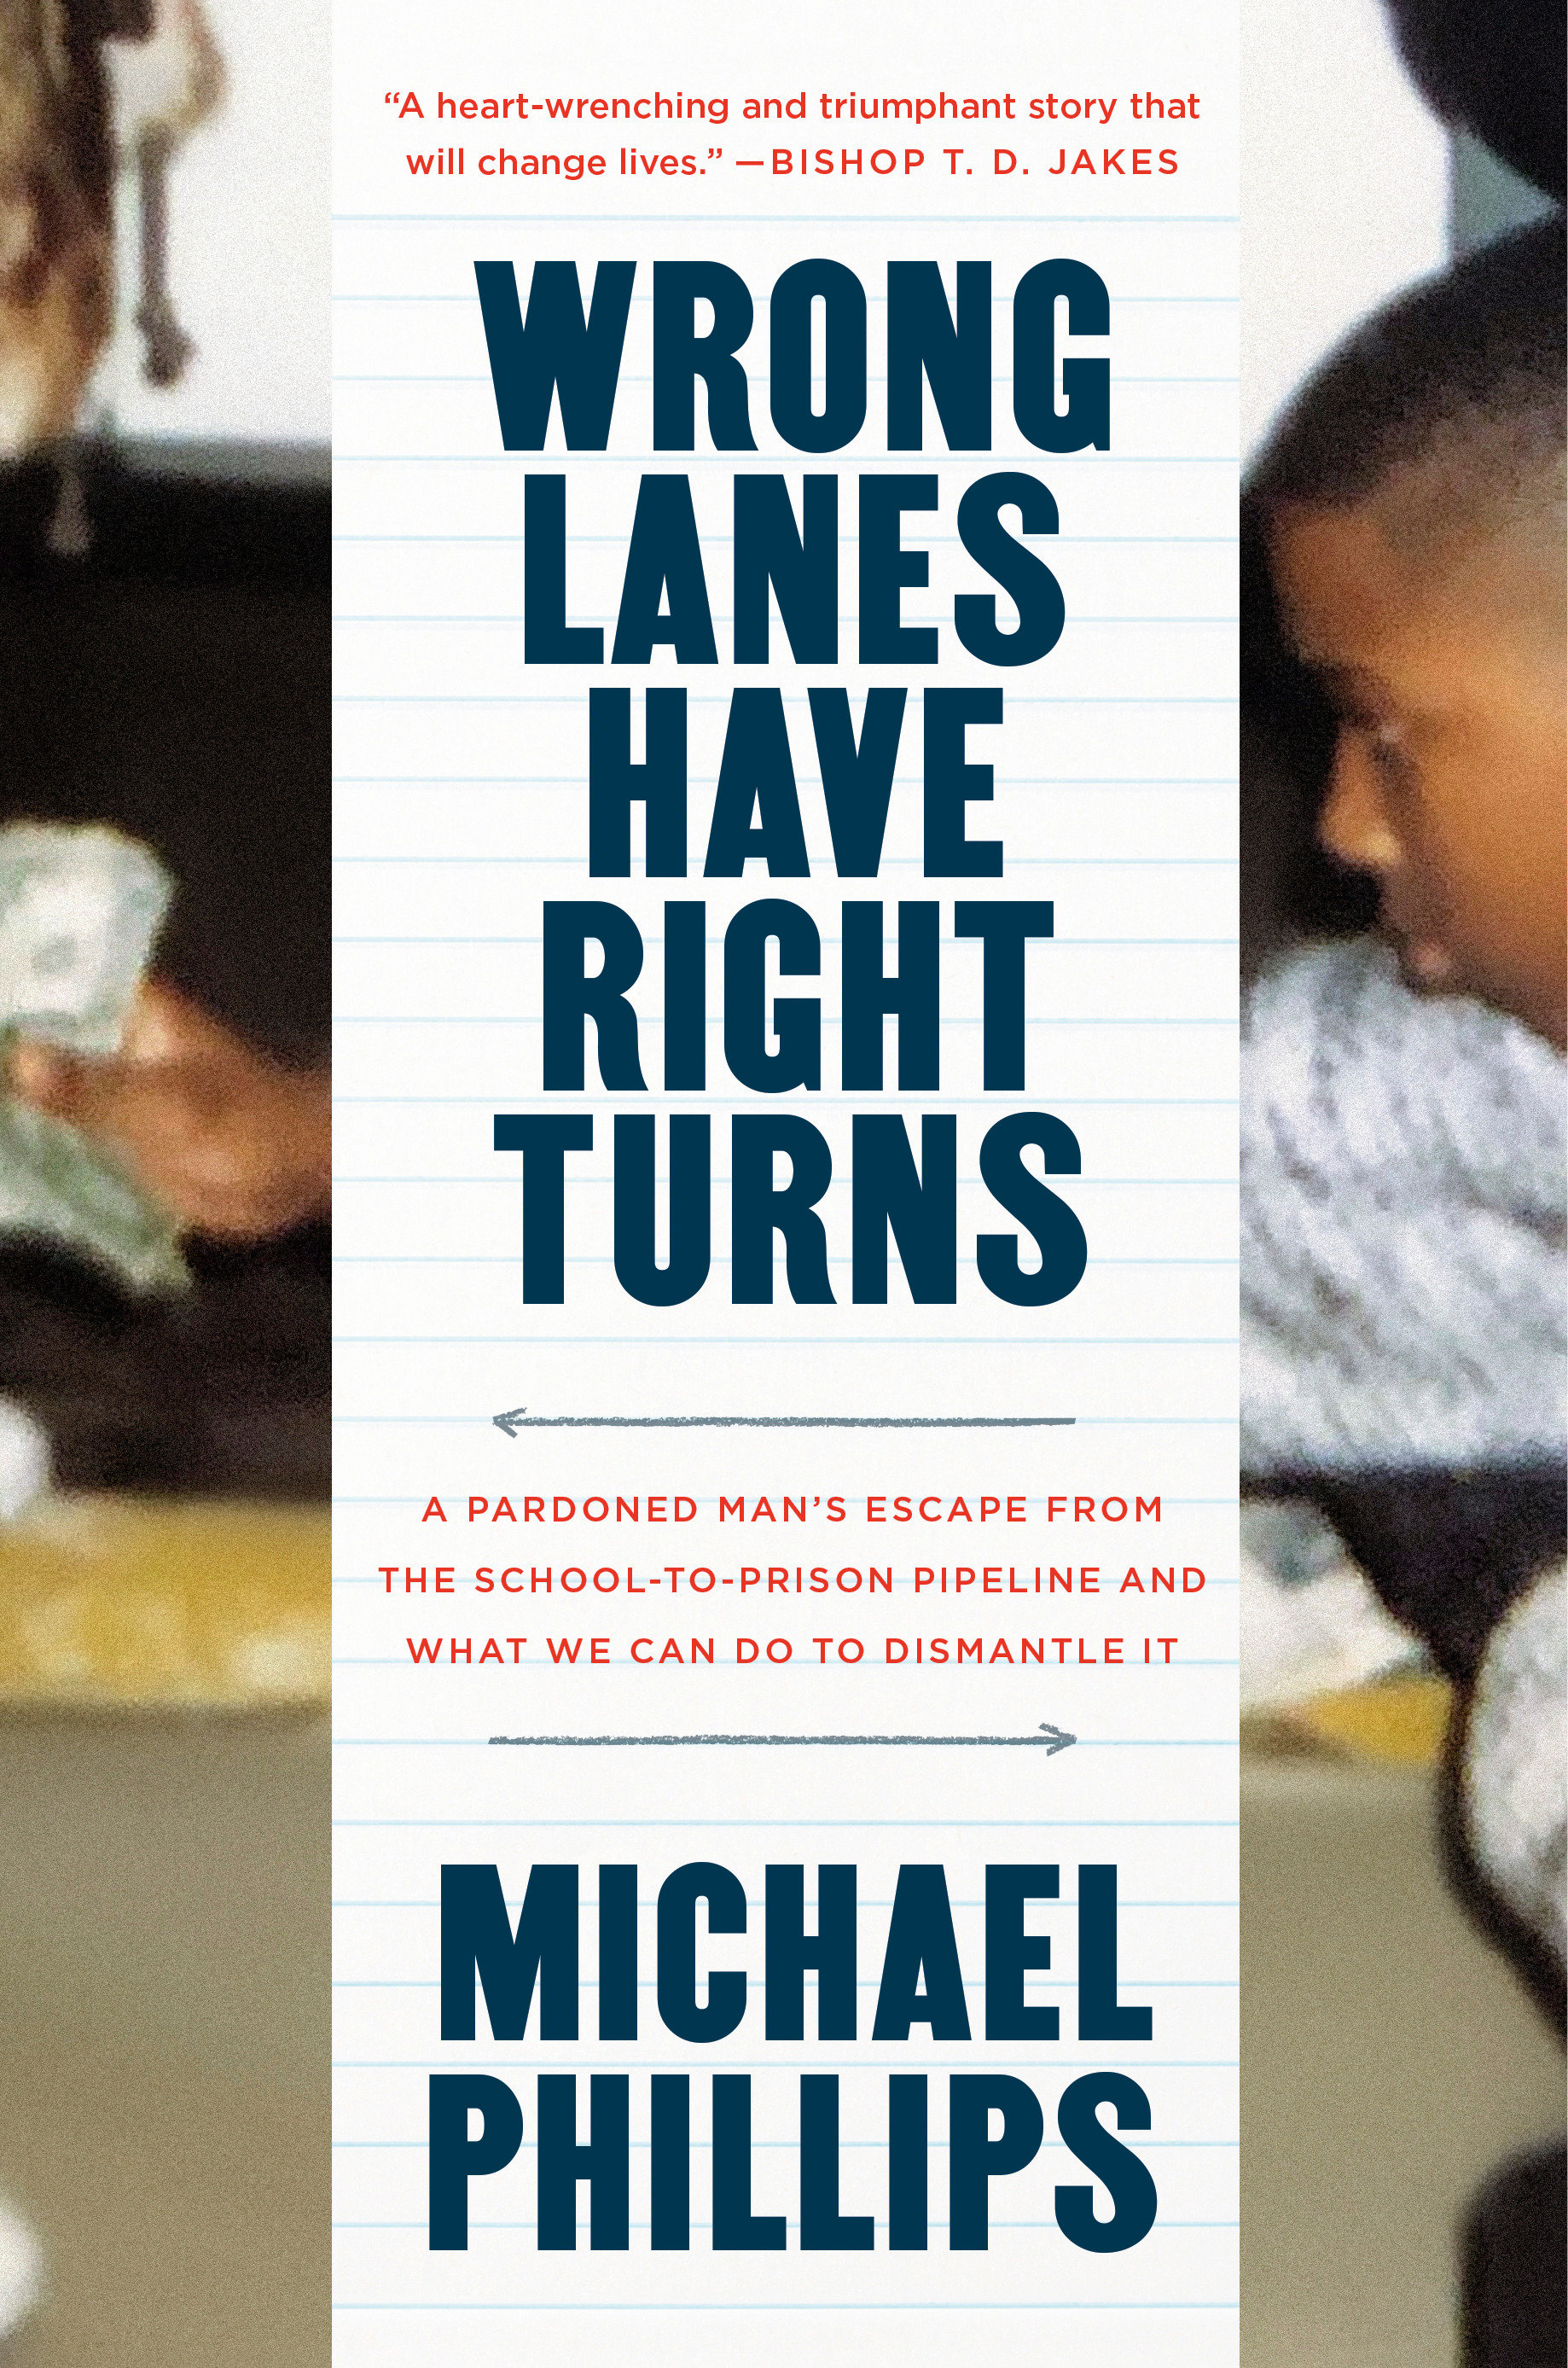 Wrong Lanes Have Right Turns (Hardcover Book)